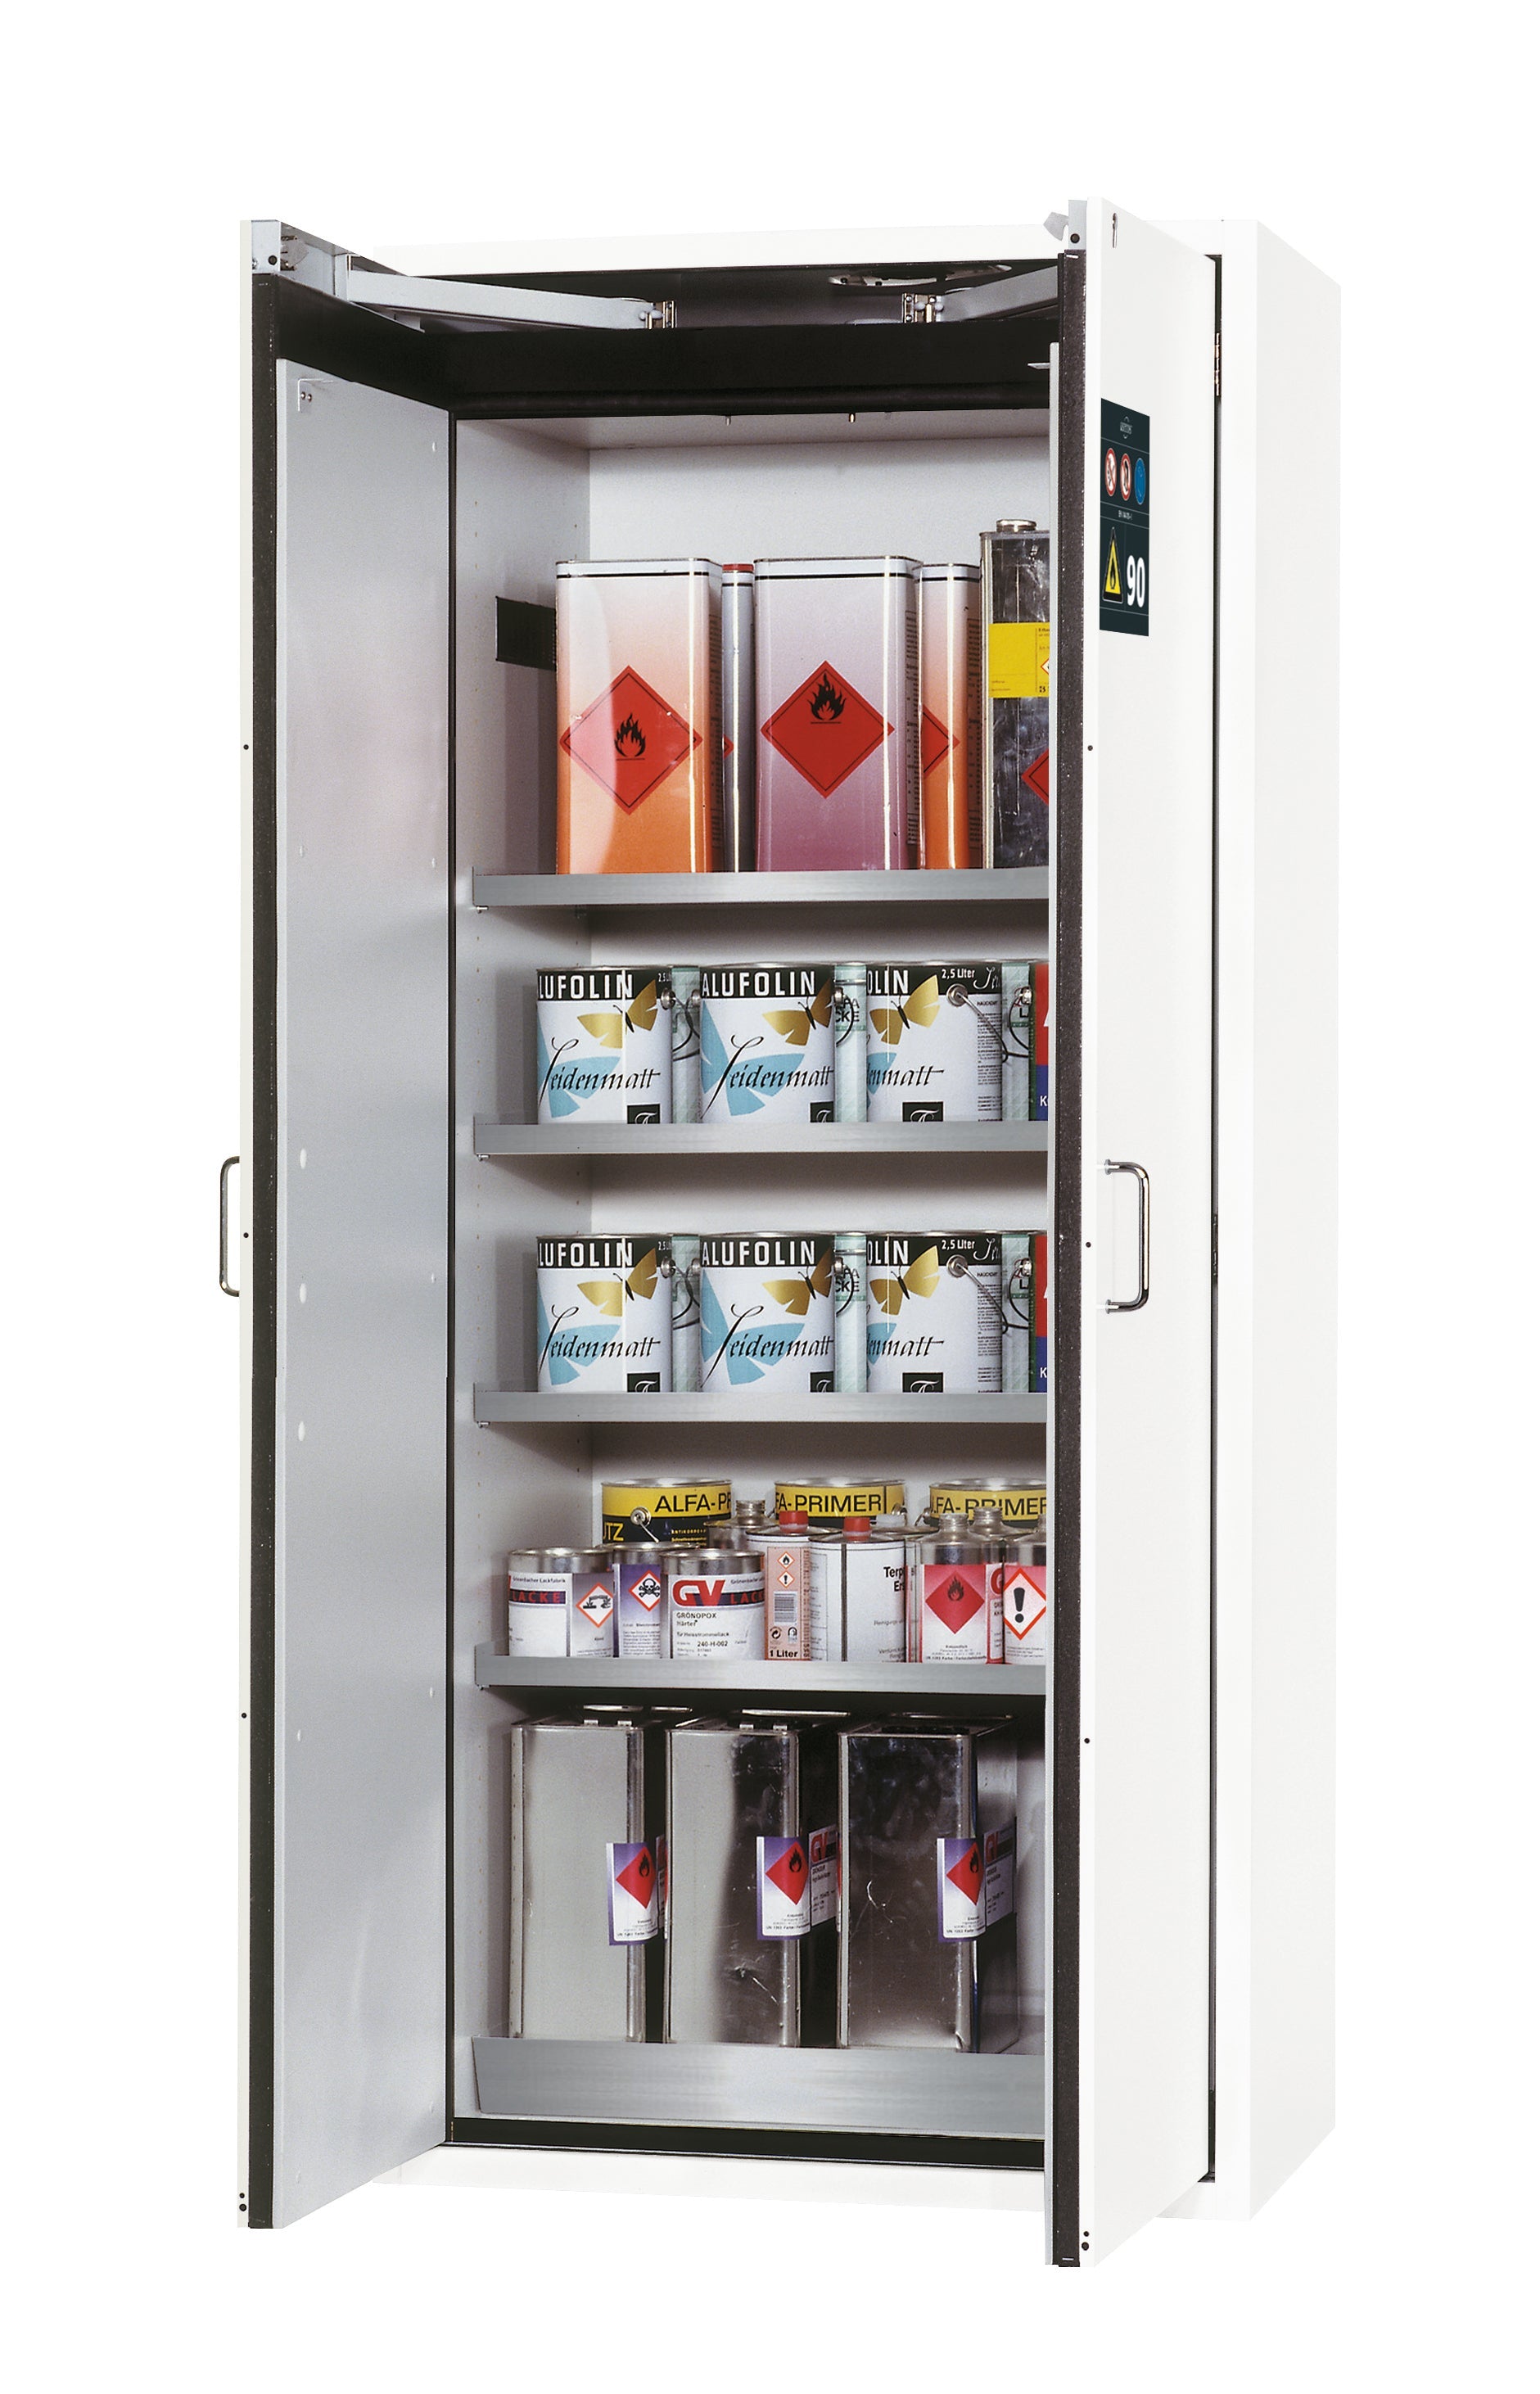 Type 90 safety cabinet S-CLASSIC-90 model S90.196.090.WDAS in laboratory white (similar to RAL 9016) with 4x standard shelves (stainless steel 1.4301)